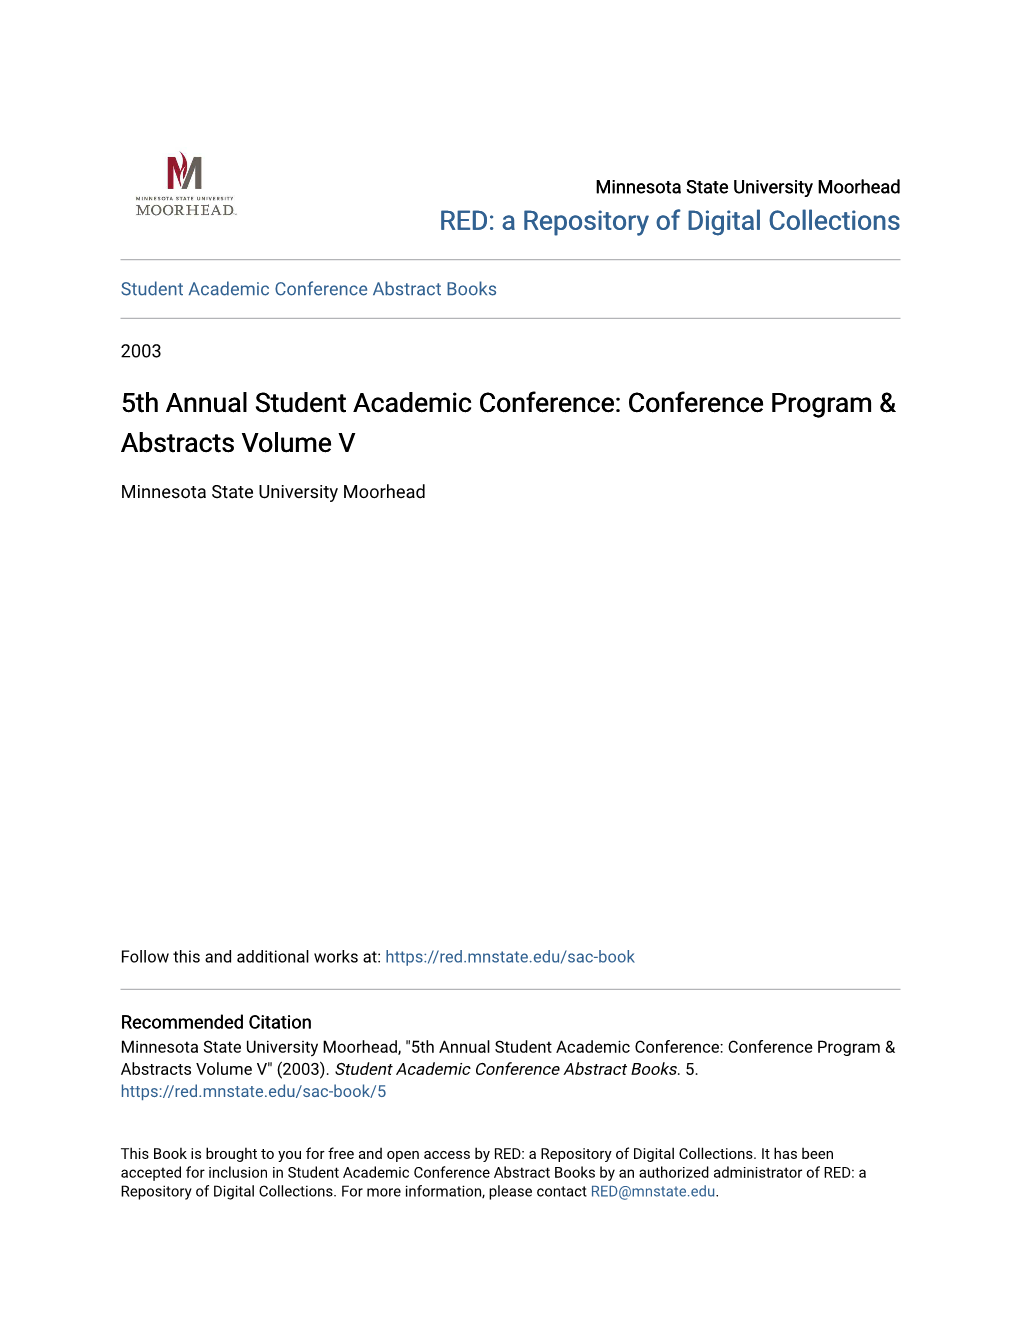 5Th Annual Student Academic Conference: Conference Program & Abstracts Volume V